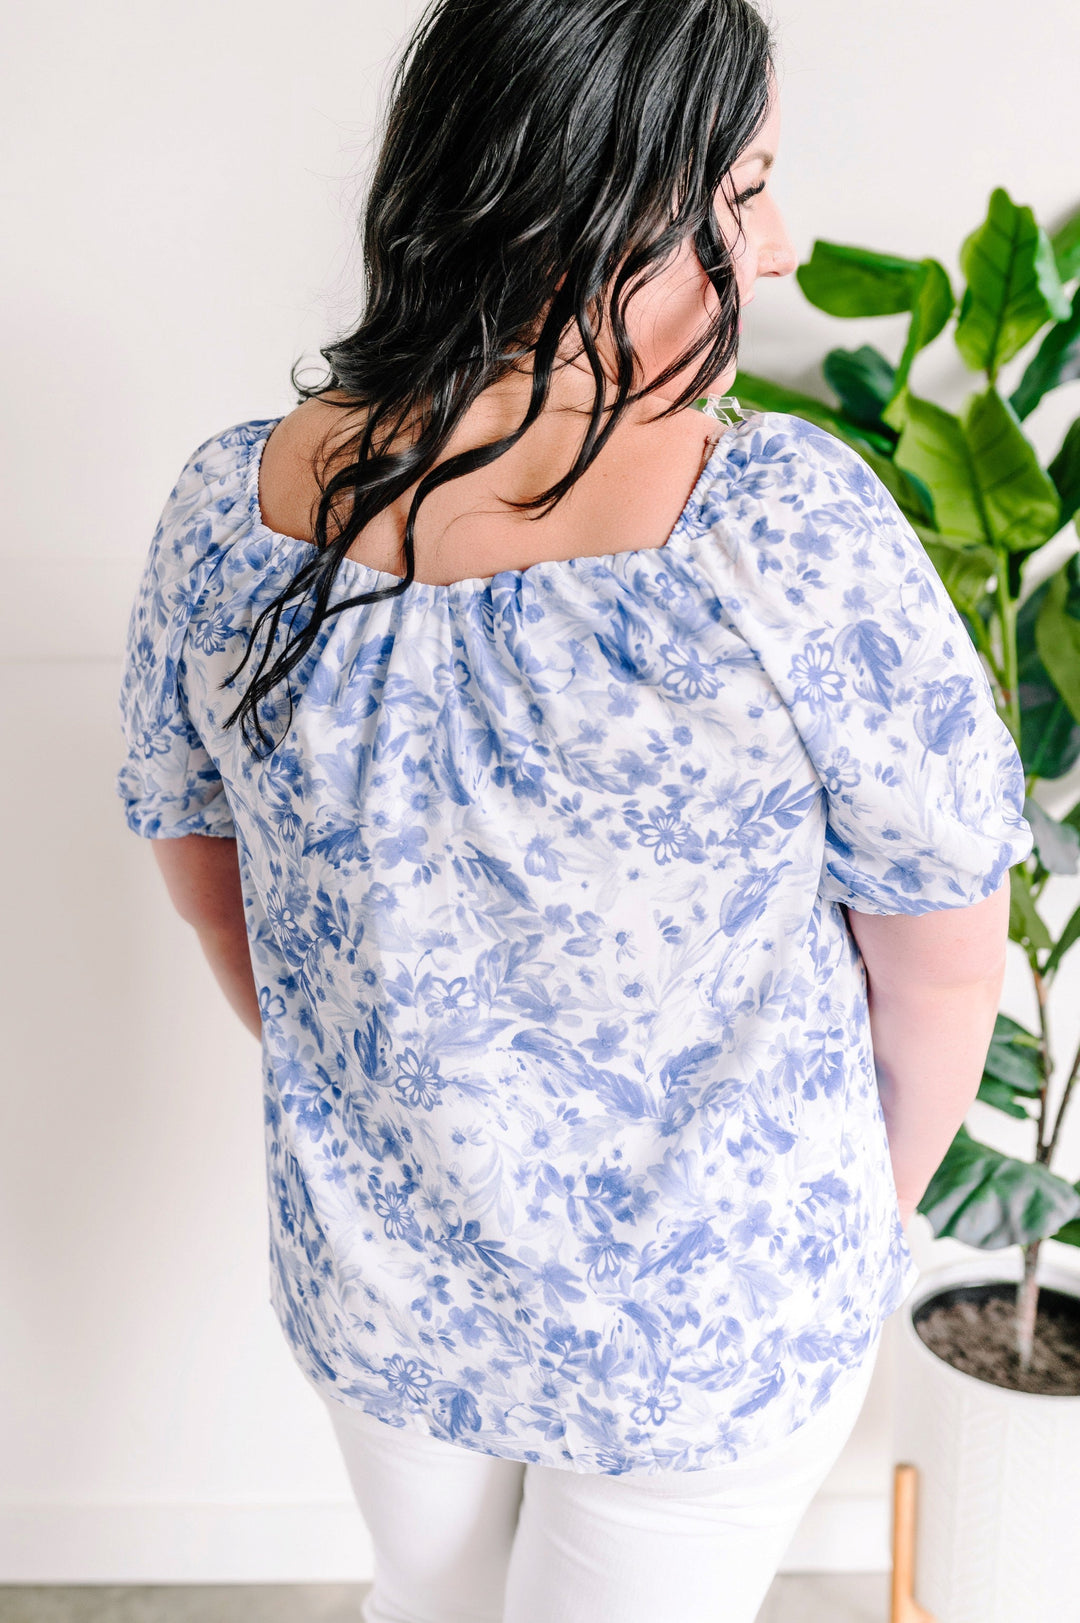 Sweetheart Neckline Blouse In Porcelain & Blue Floral-short sleeve top-Styled by Steph-Styled by Steph-Women's Fashion Clothing Boutique, Indiana